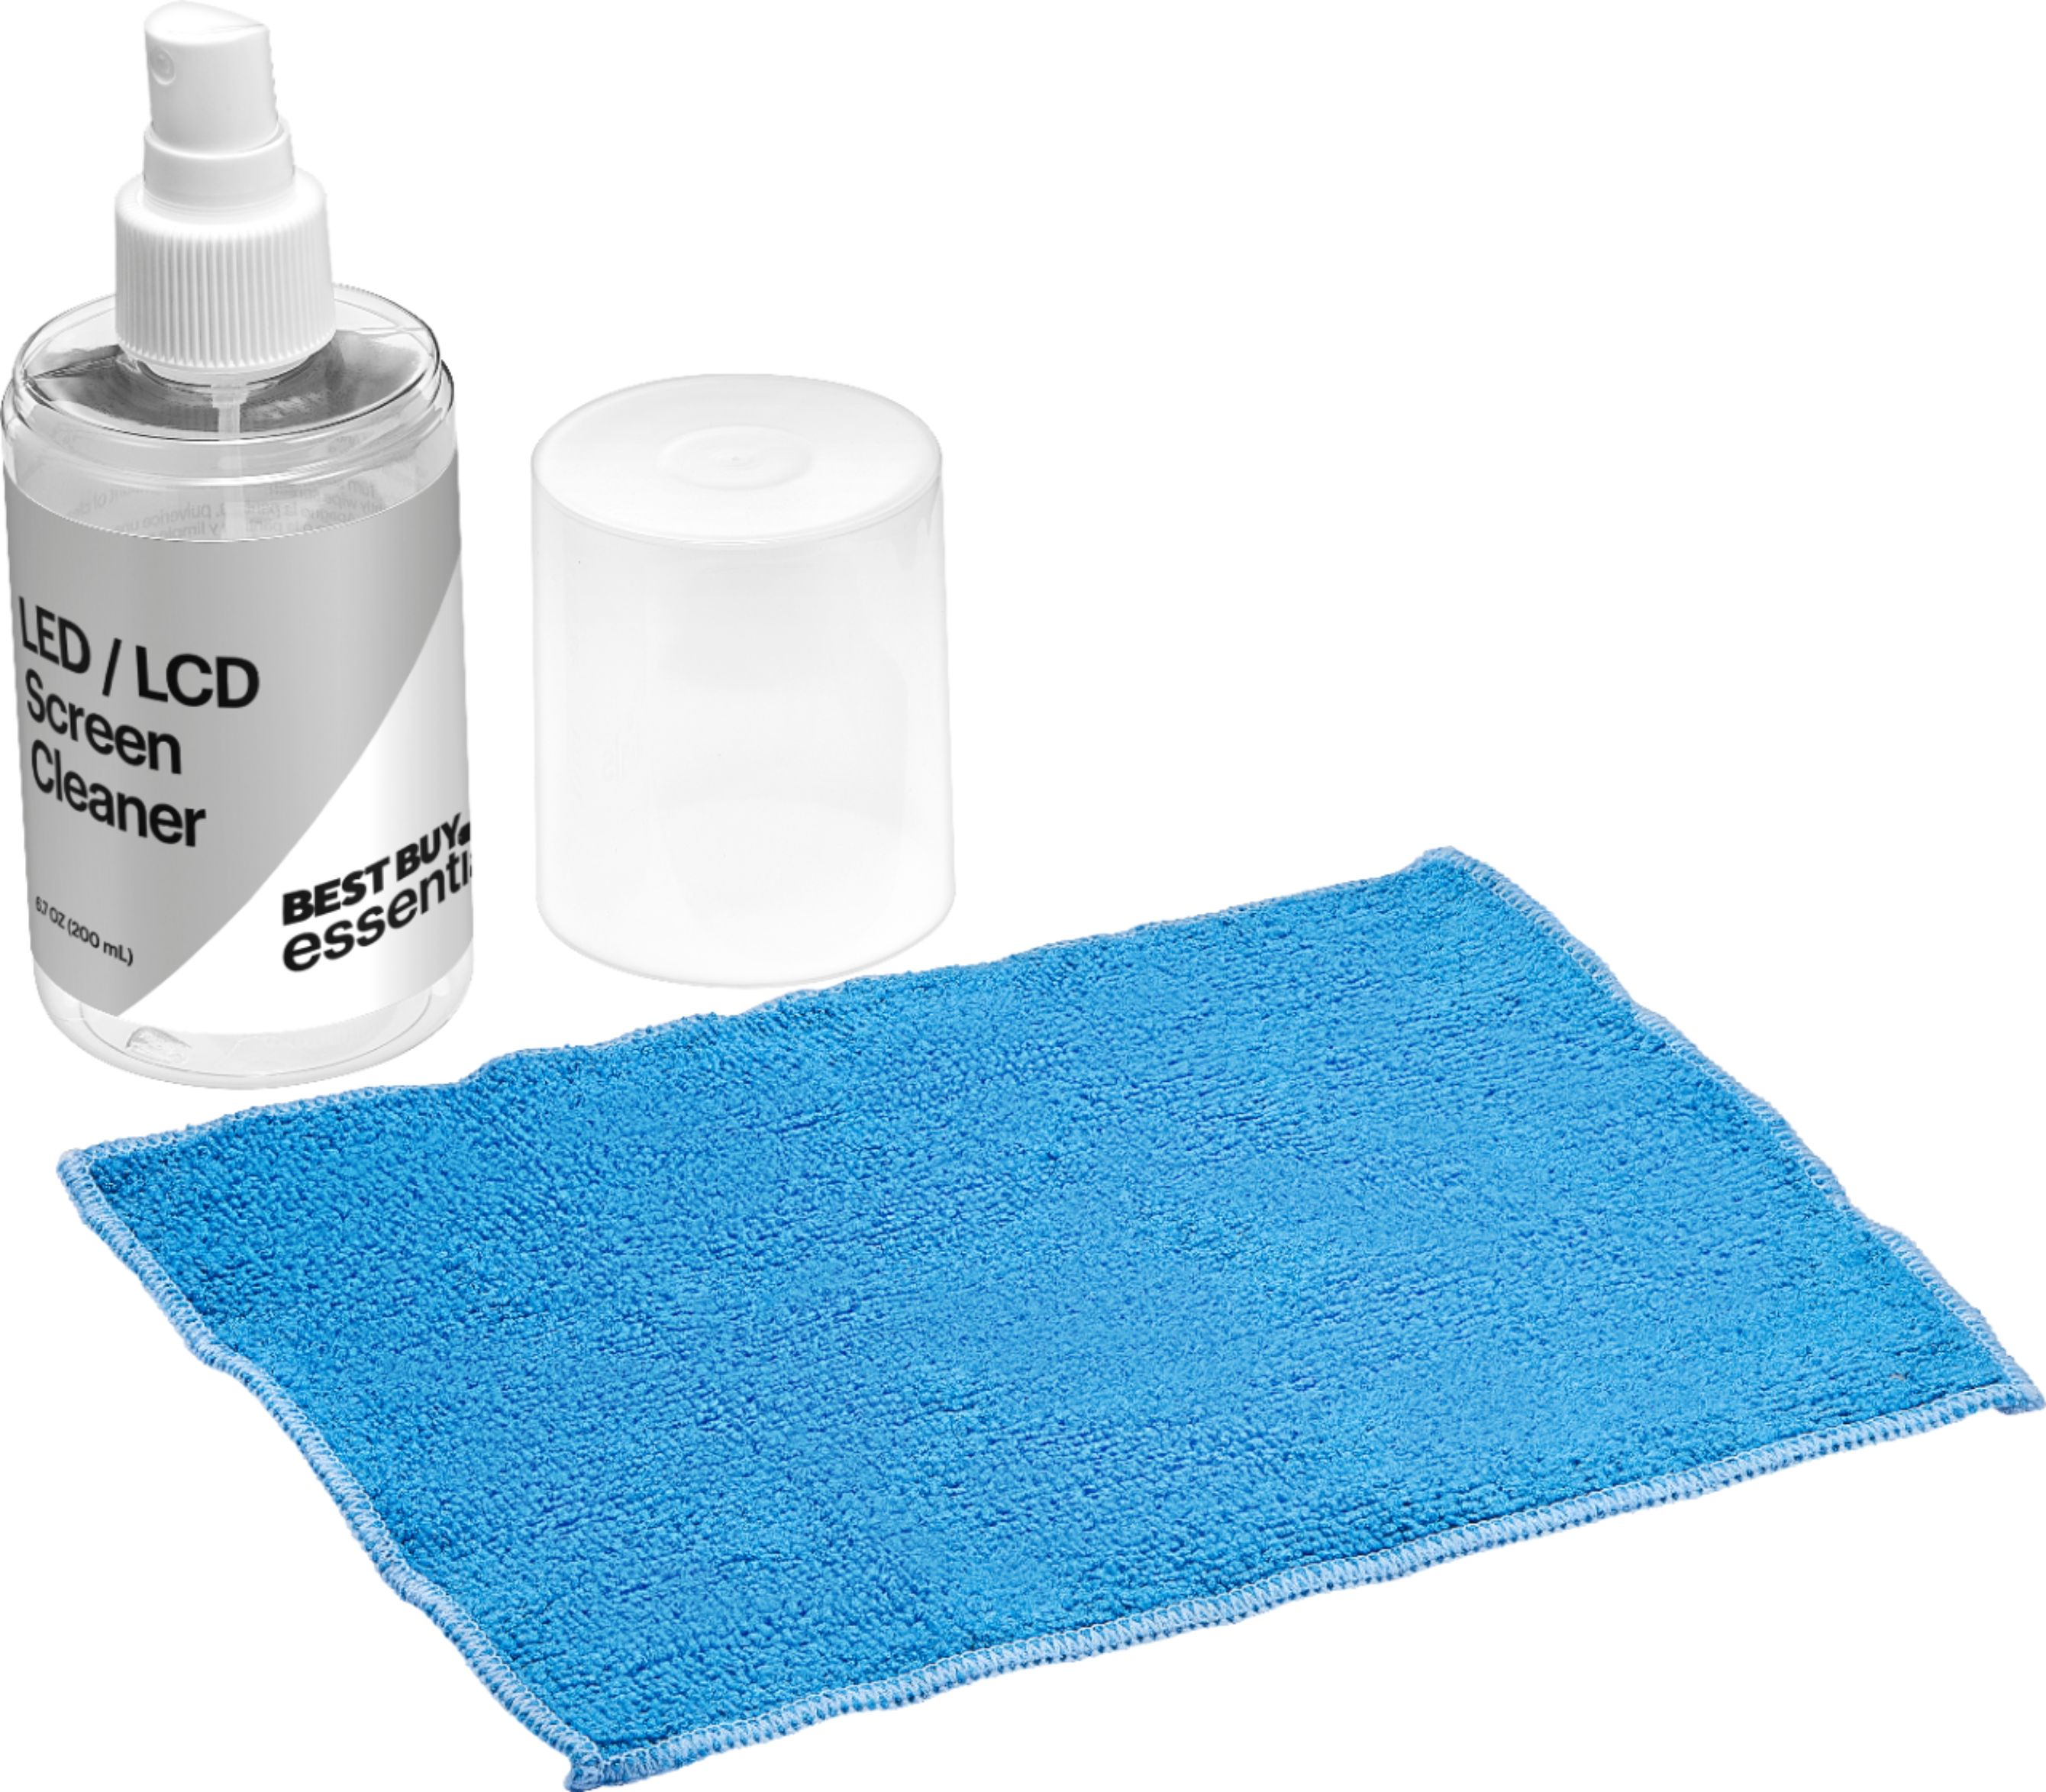 Best Buy Essentials - LCD Screen Cleaning Kit